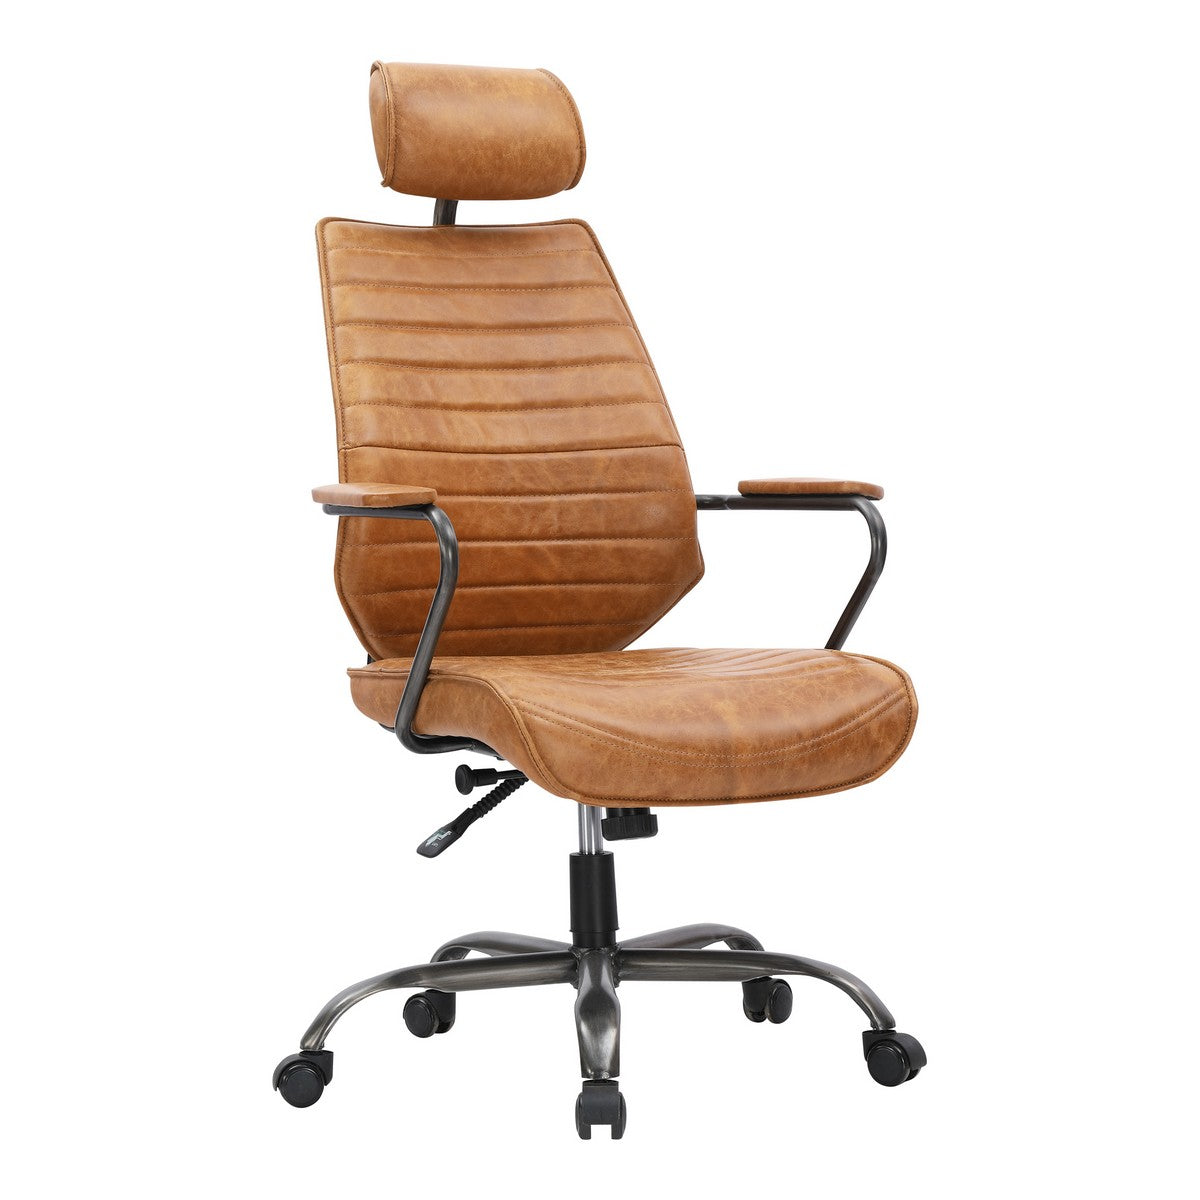 Moe's Home Collection Executive Swivel office Chair Cognac - PK-1081-23